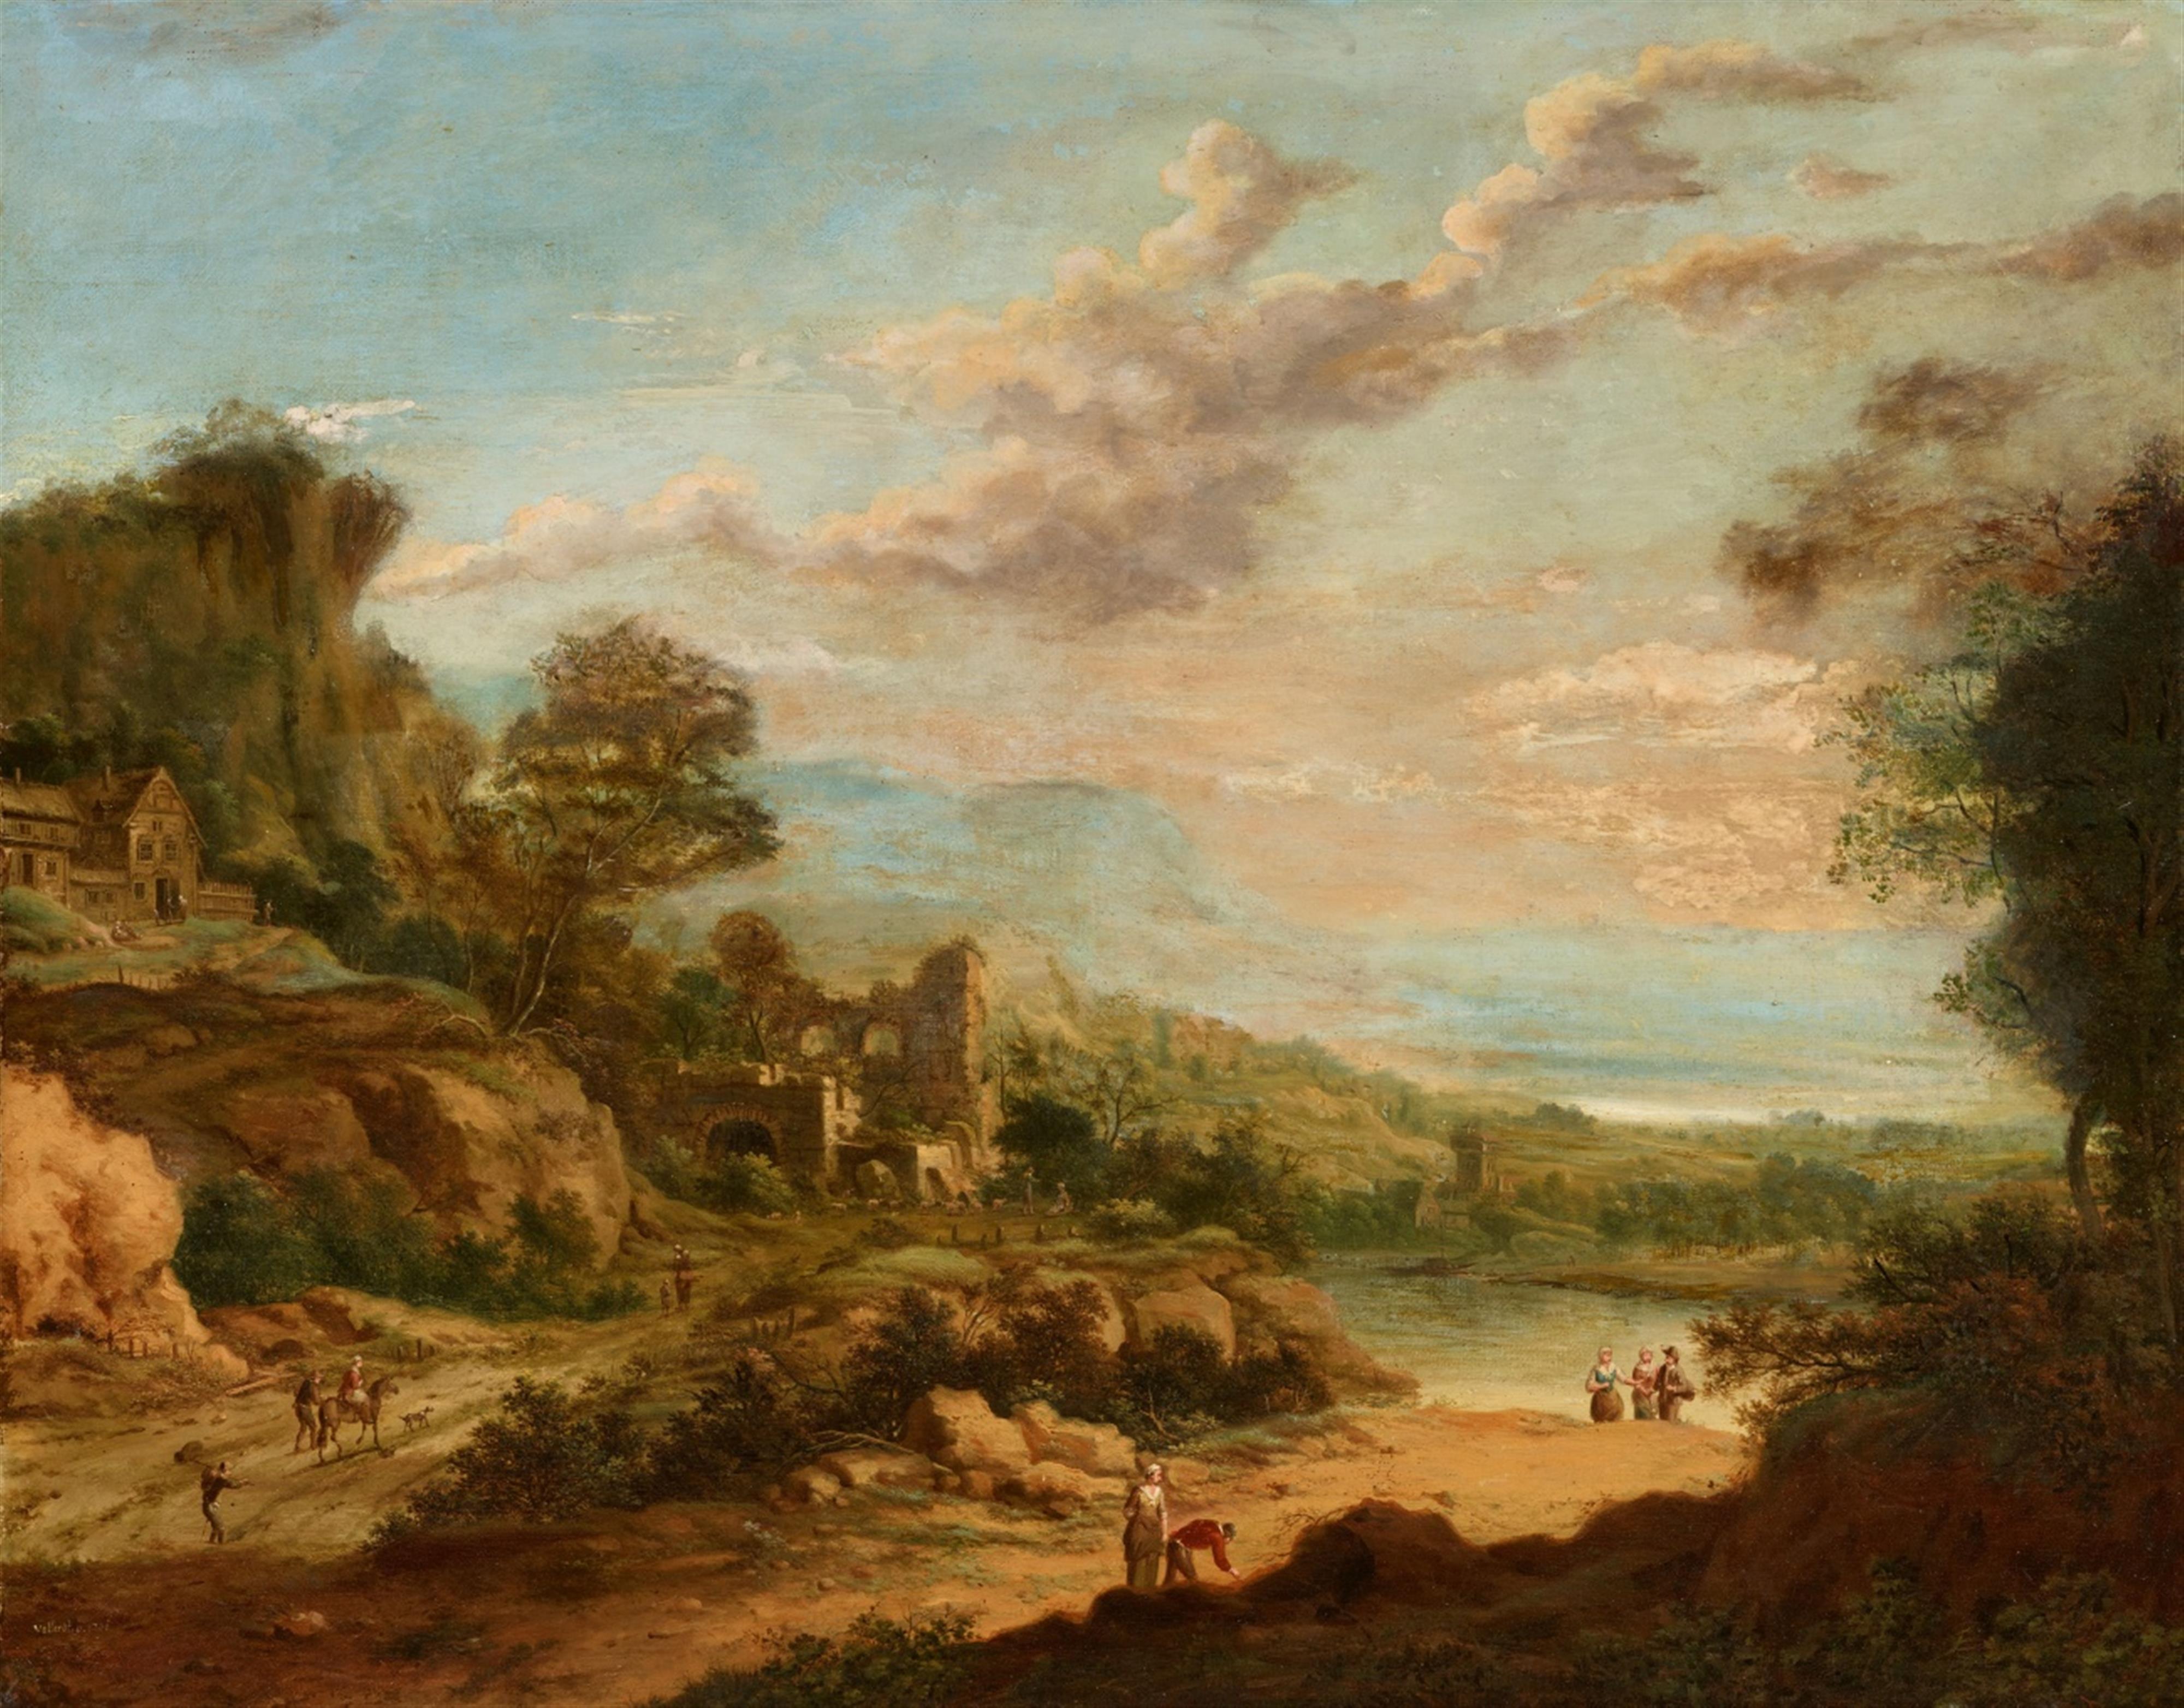 Johann Christian Vollerdt - River Landscape with Castle Ruin and Figural Staffage - image-1